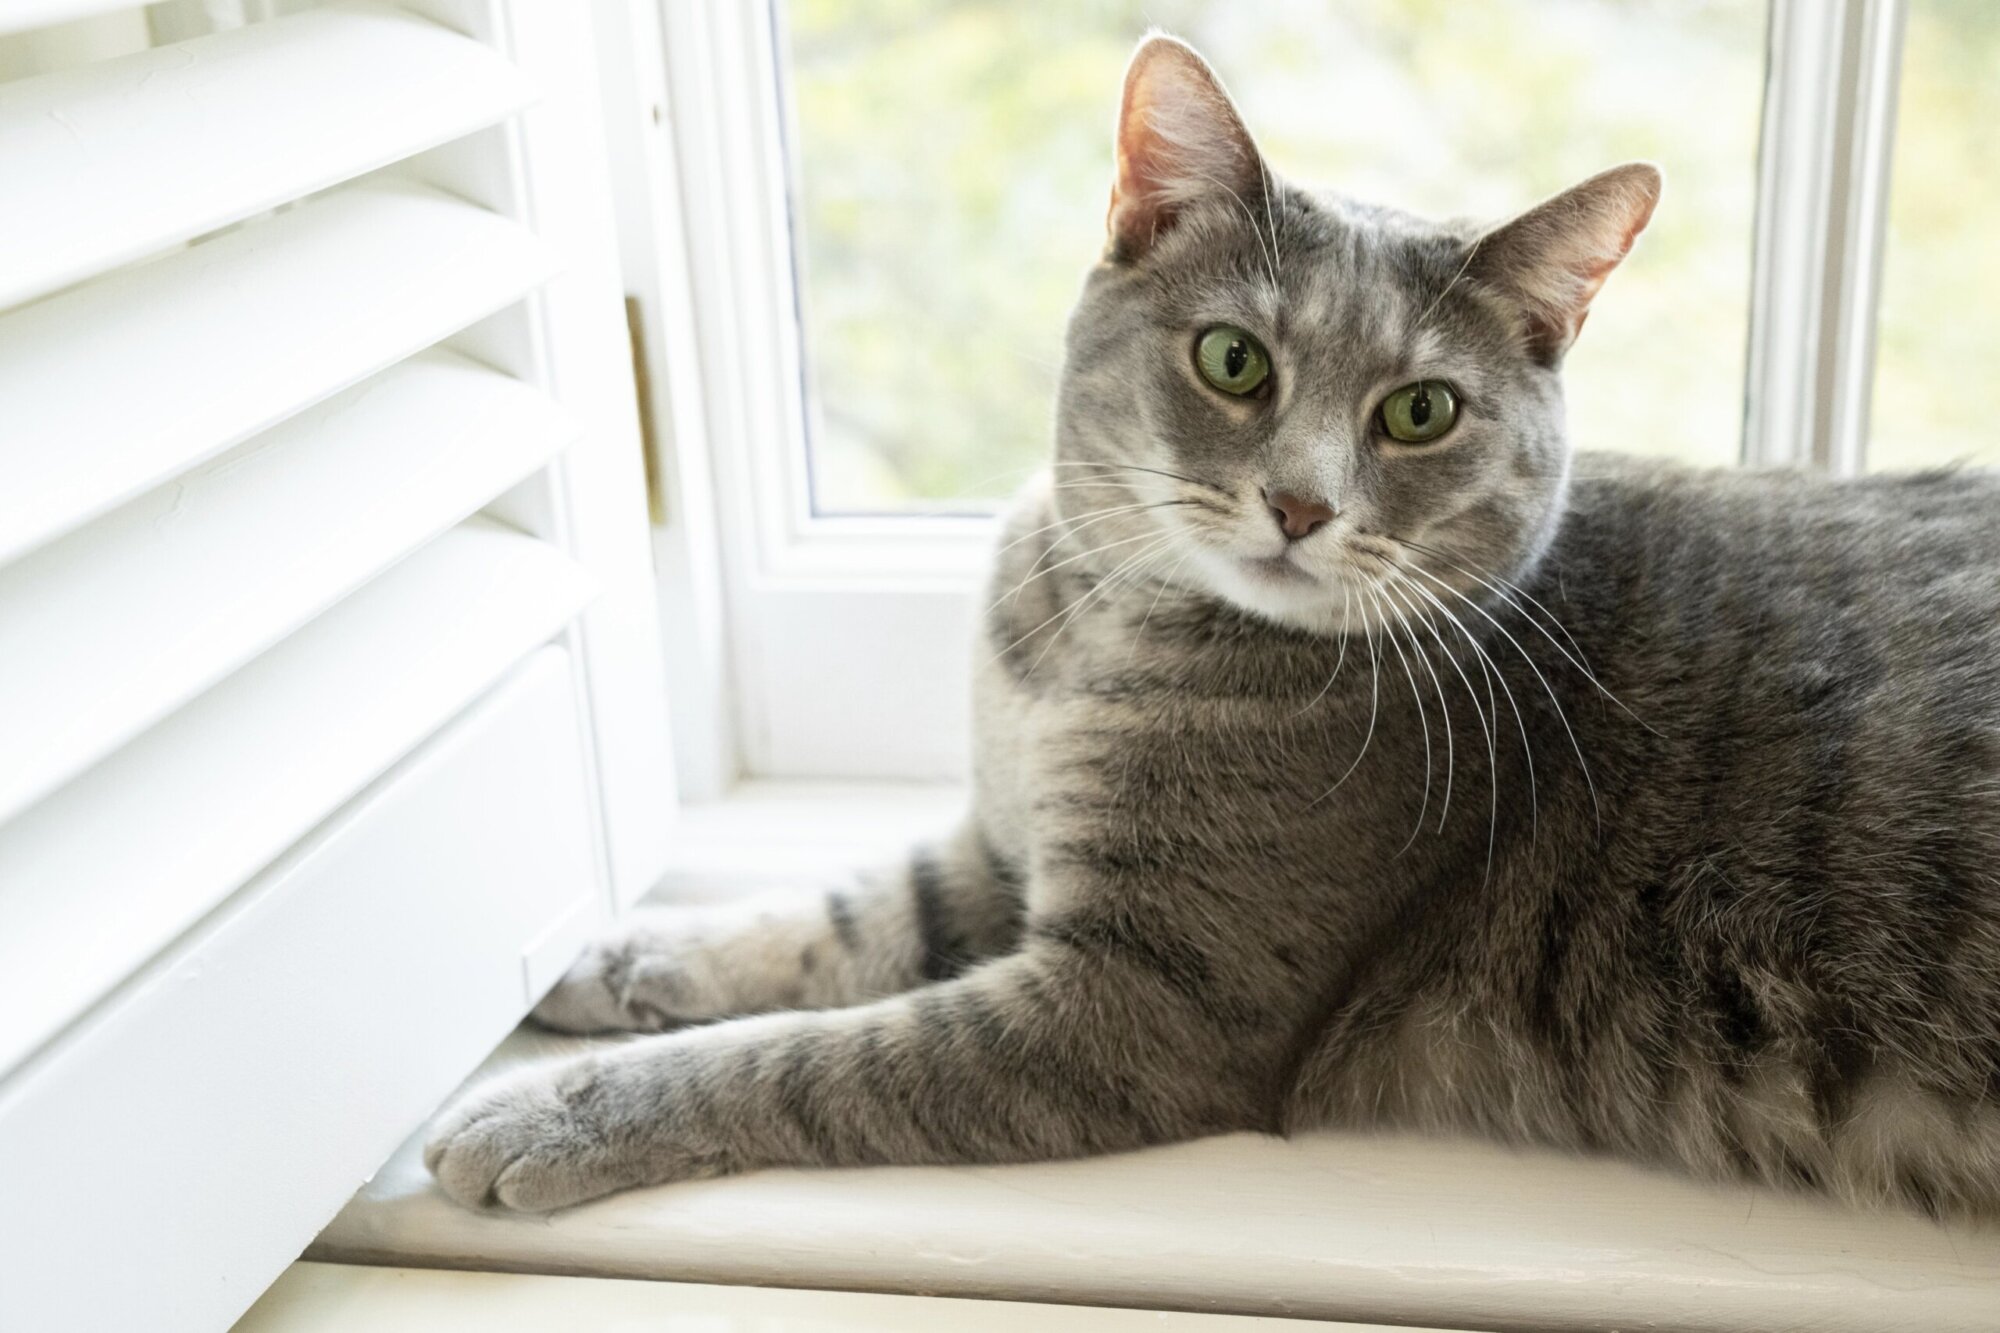 After passing in Maryland, ban on cat declawing fails in Virginia